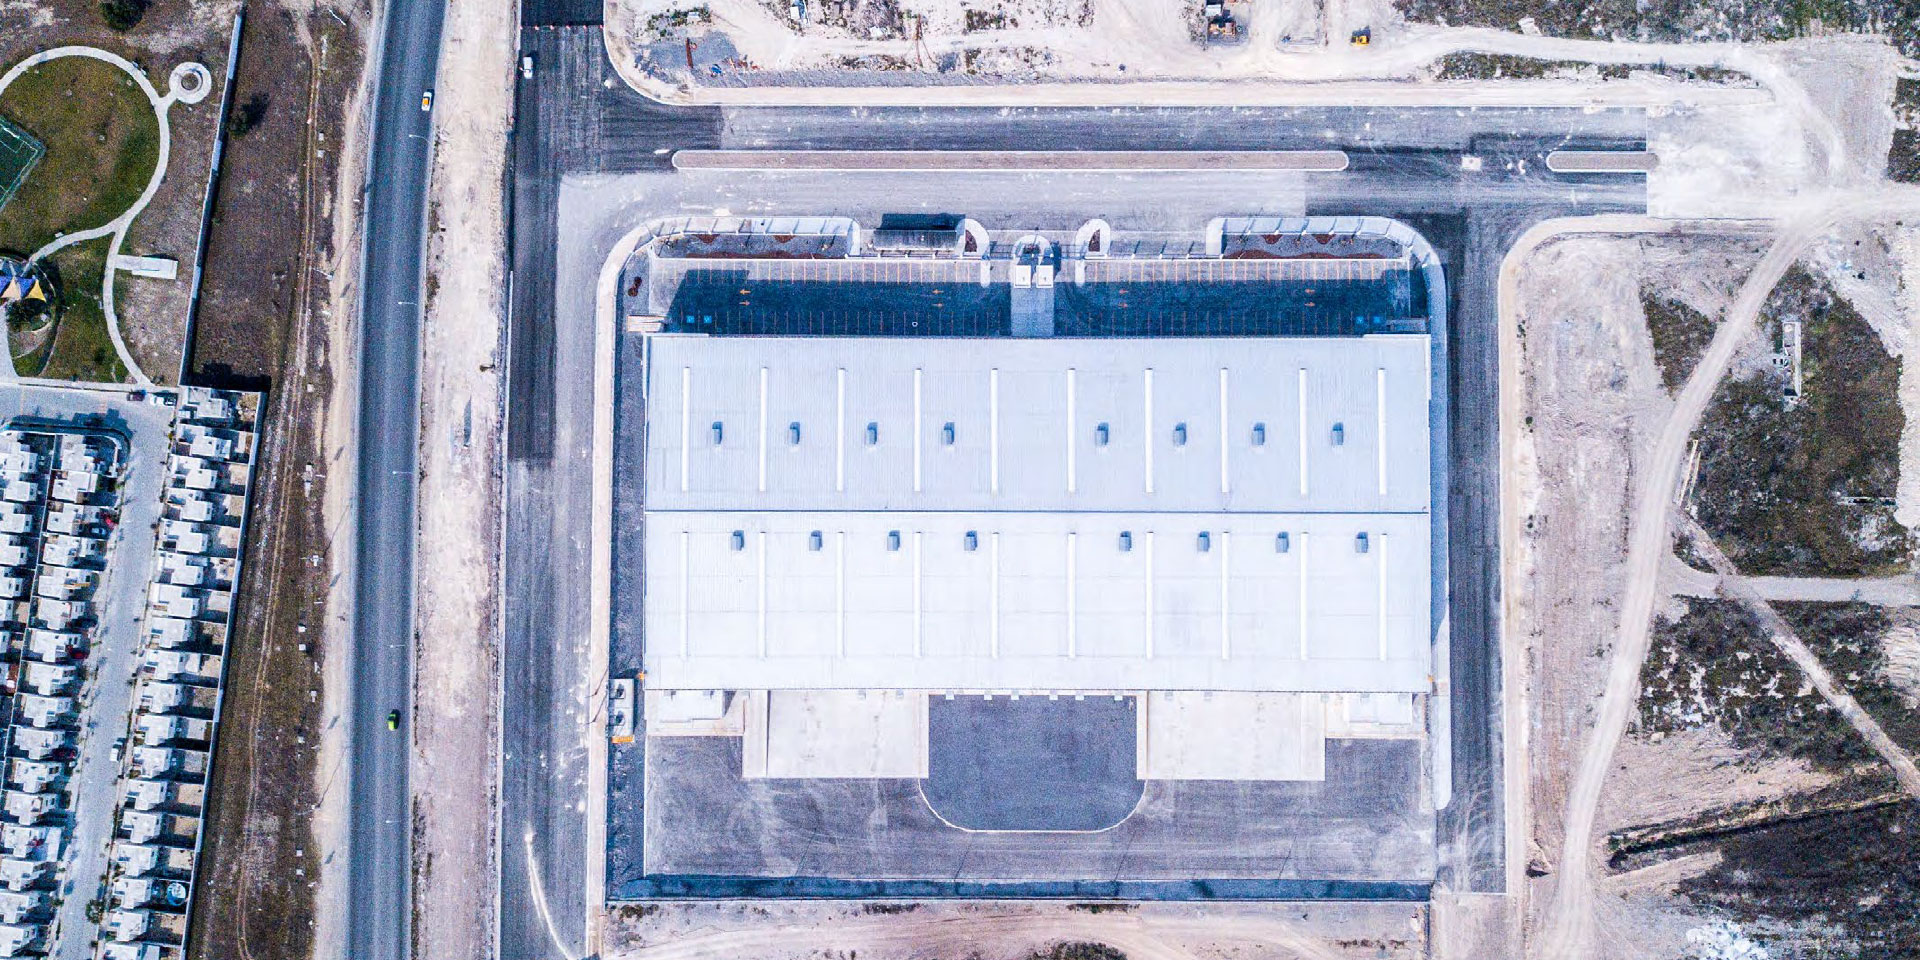 Drone photograph of a DAVISA industrial park located in Apodaca